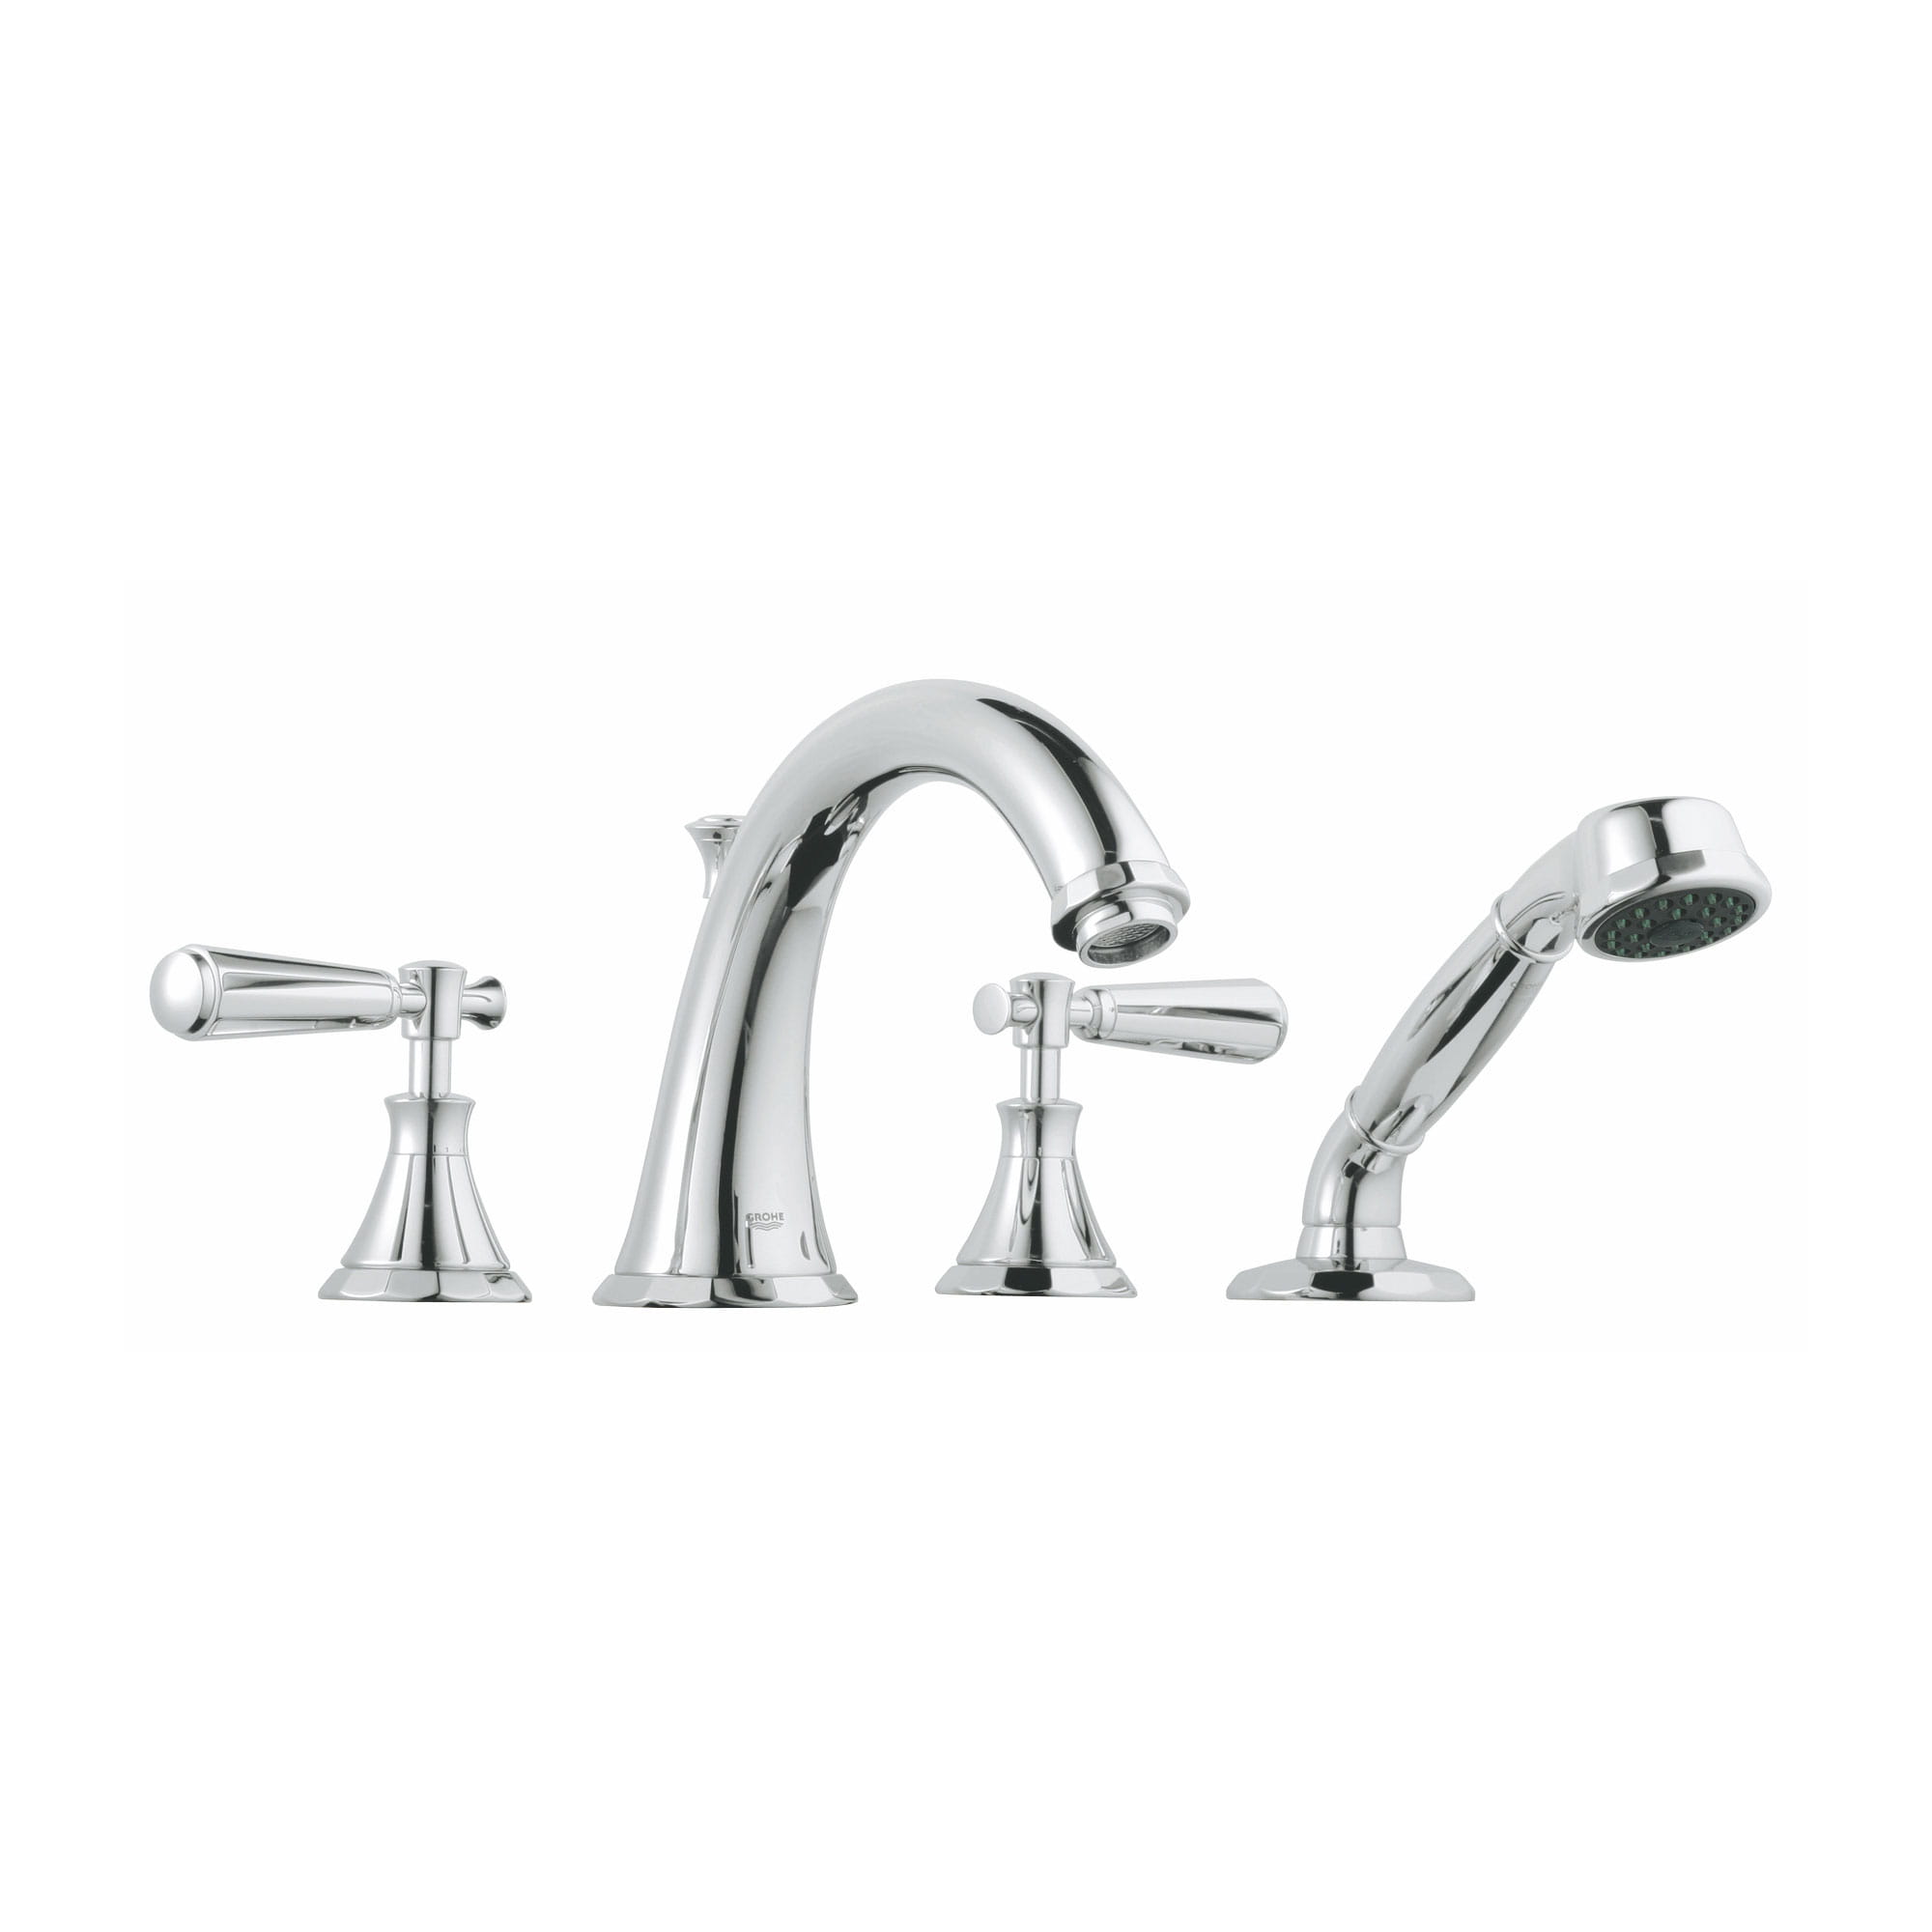 4-Hole 2-Handle Deck Mount Roman Tub Faucet with 2.5 GPM Hand Shower